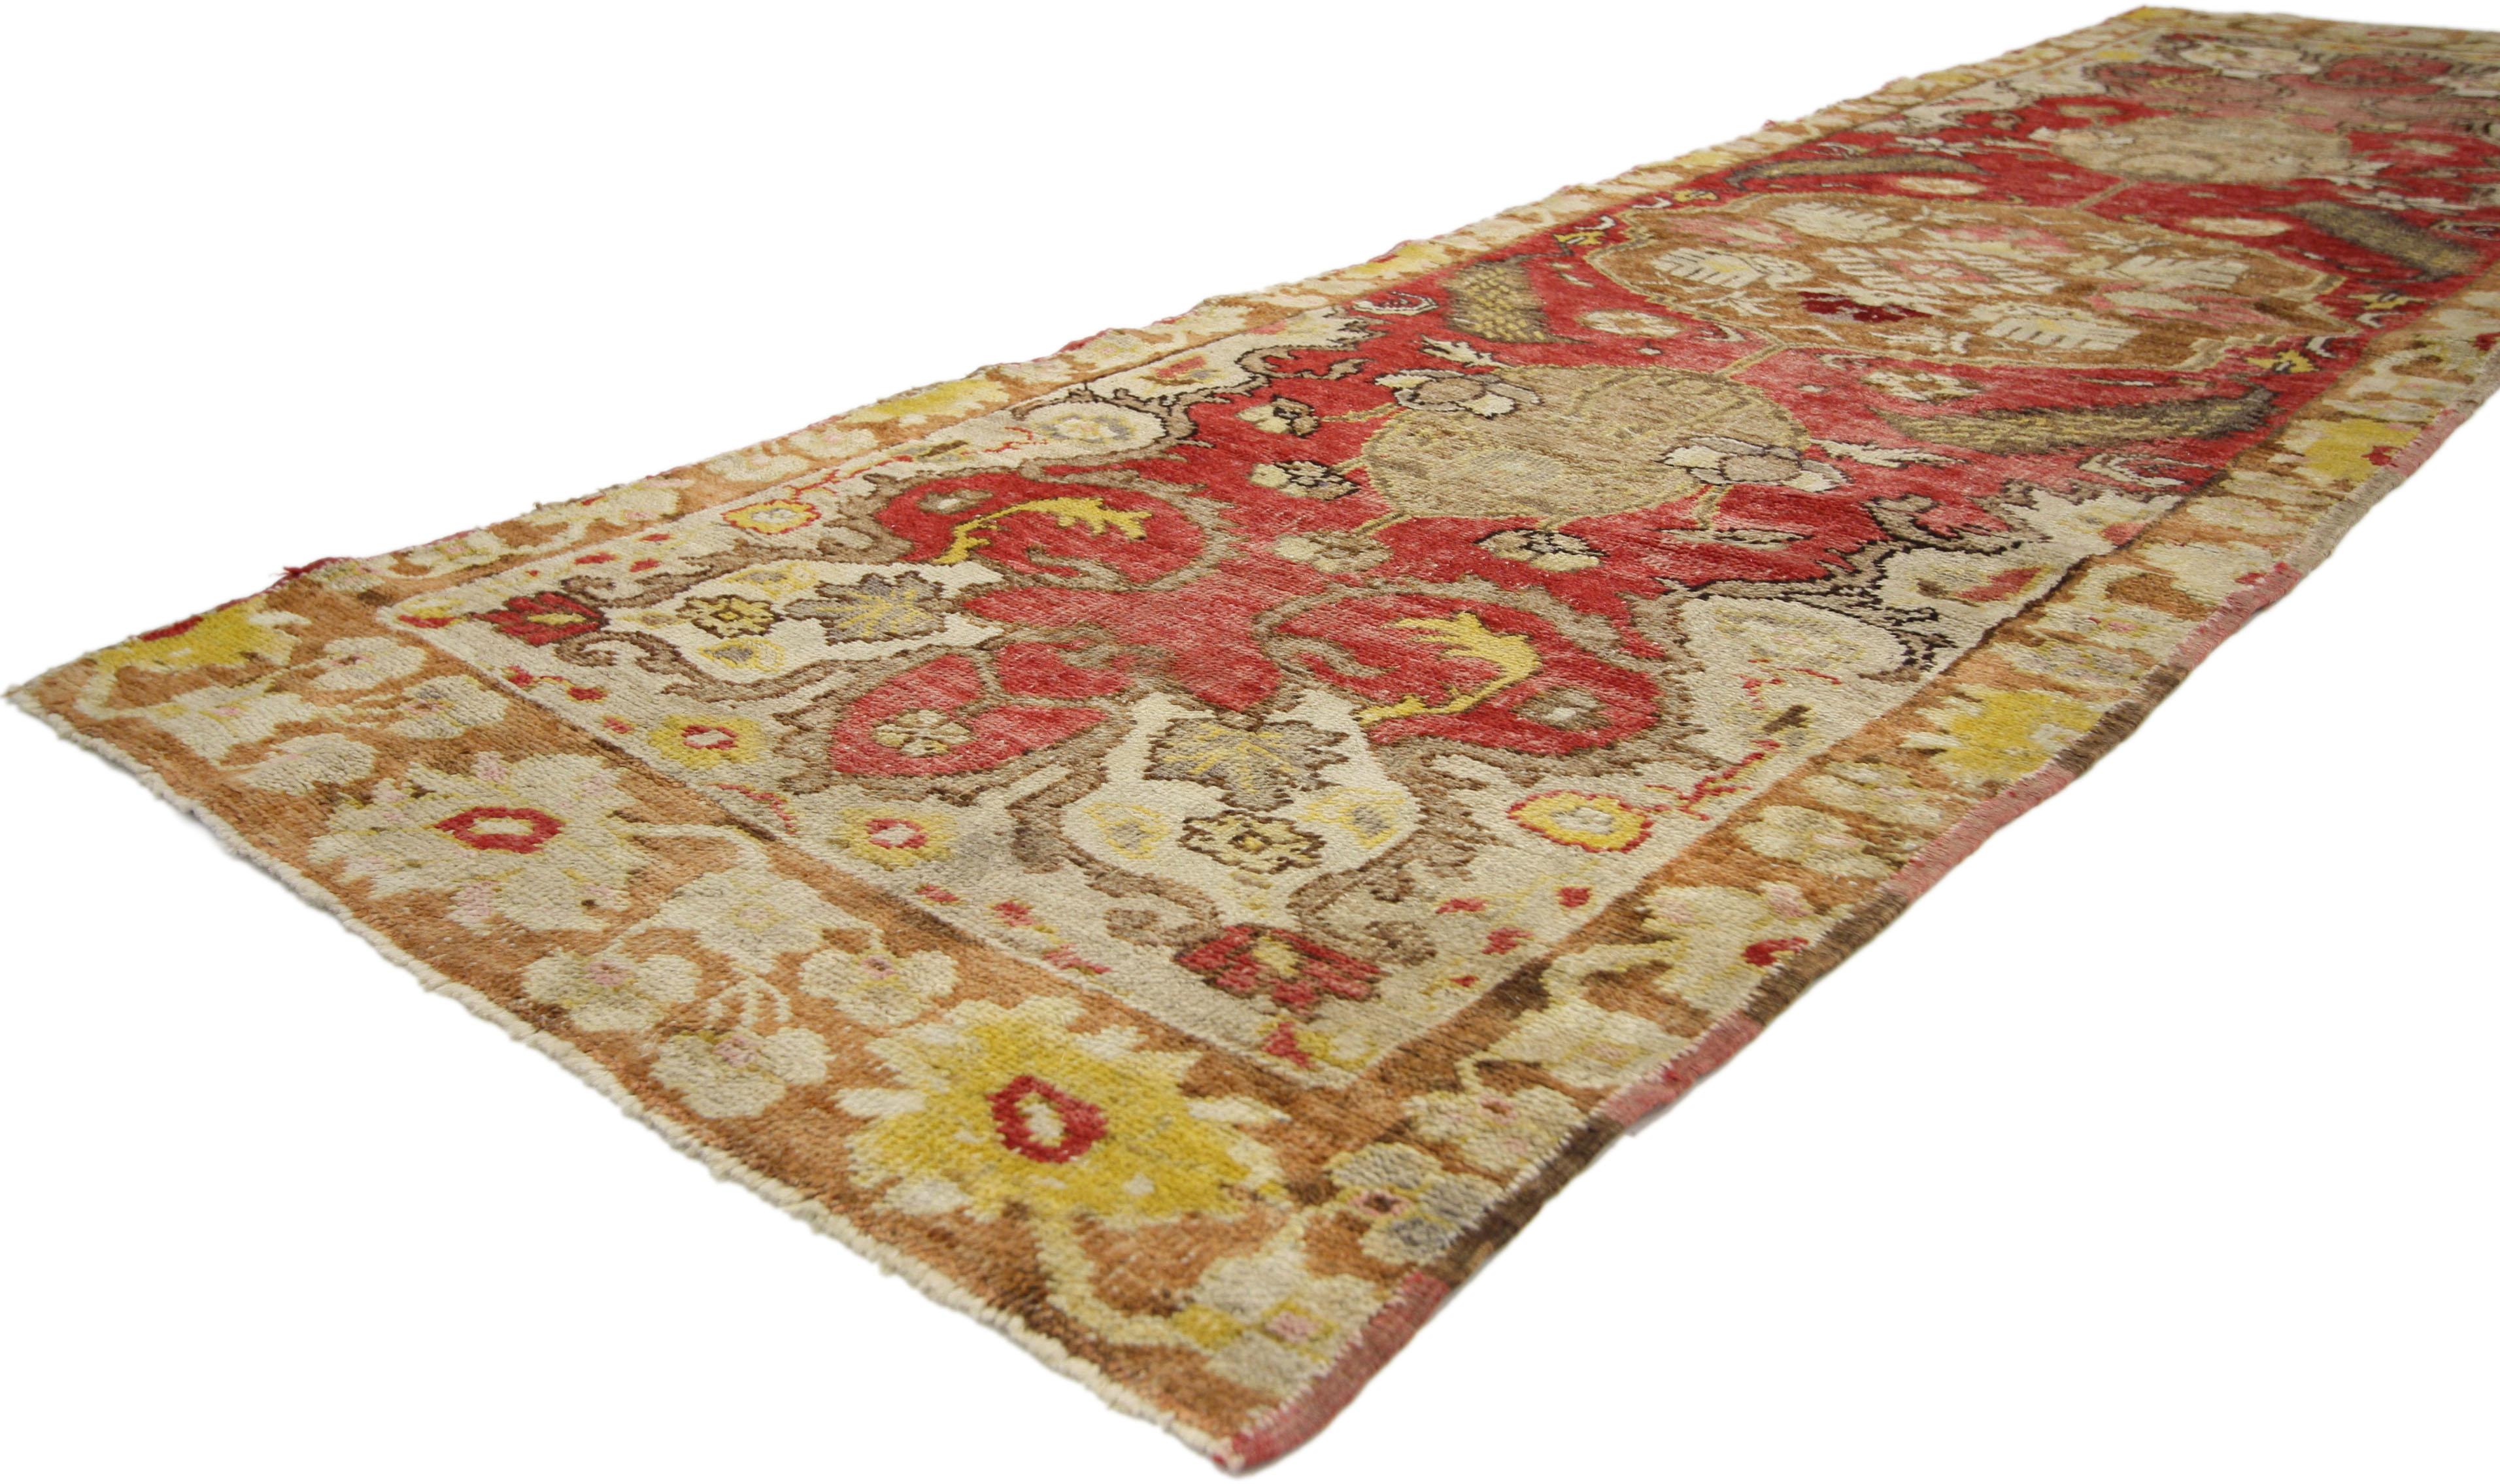 51189, distressed vintage Turkish Oushak runner with rustic neoclassical style. This hand knotted wool vintage Turkish Oushak runner features a round medallion anchored with pinecone shaped pendants spread across an abrashed red field. The central